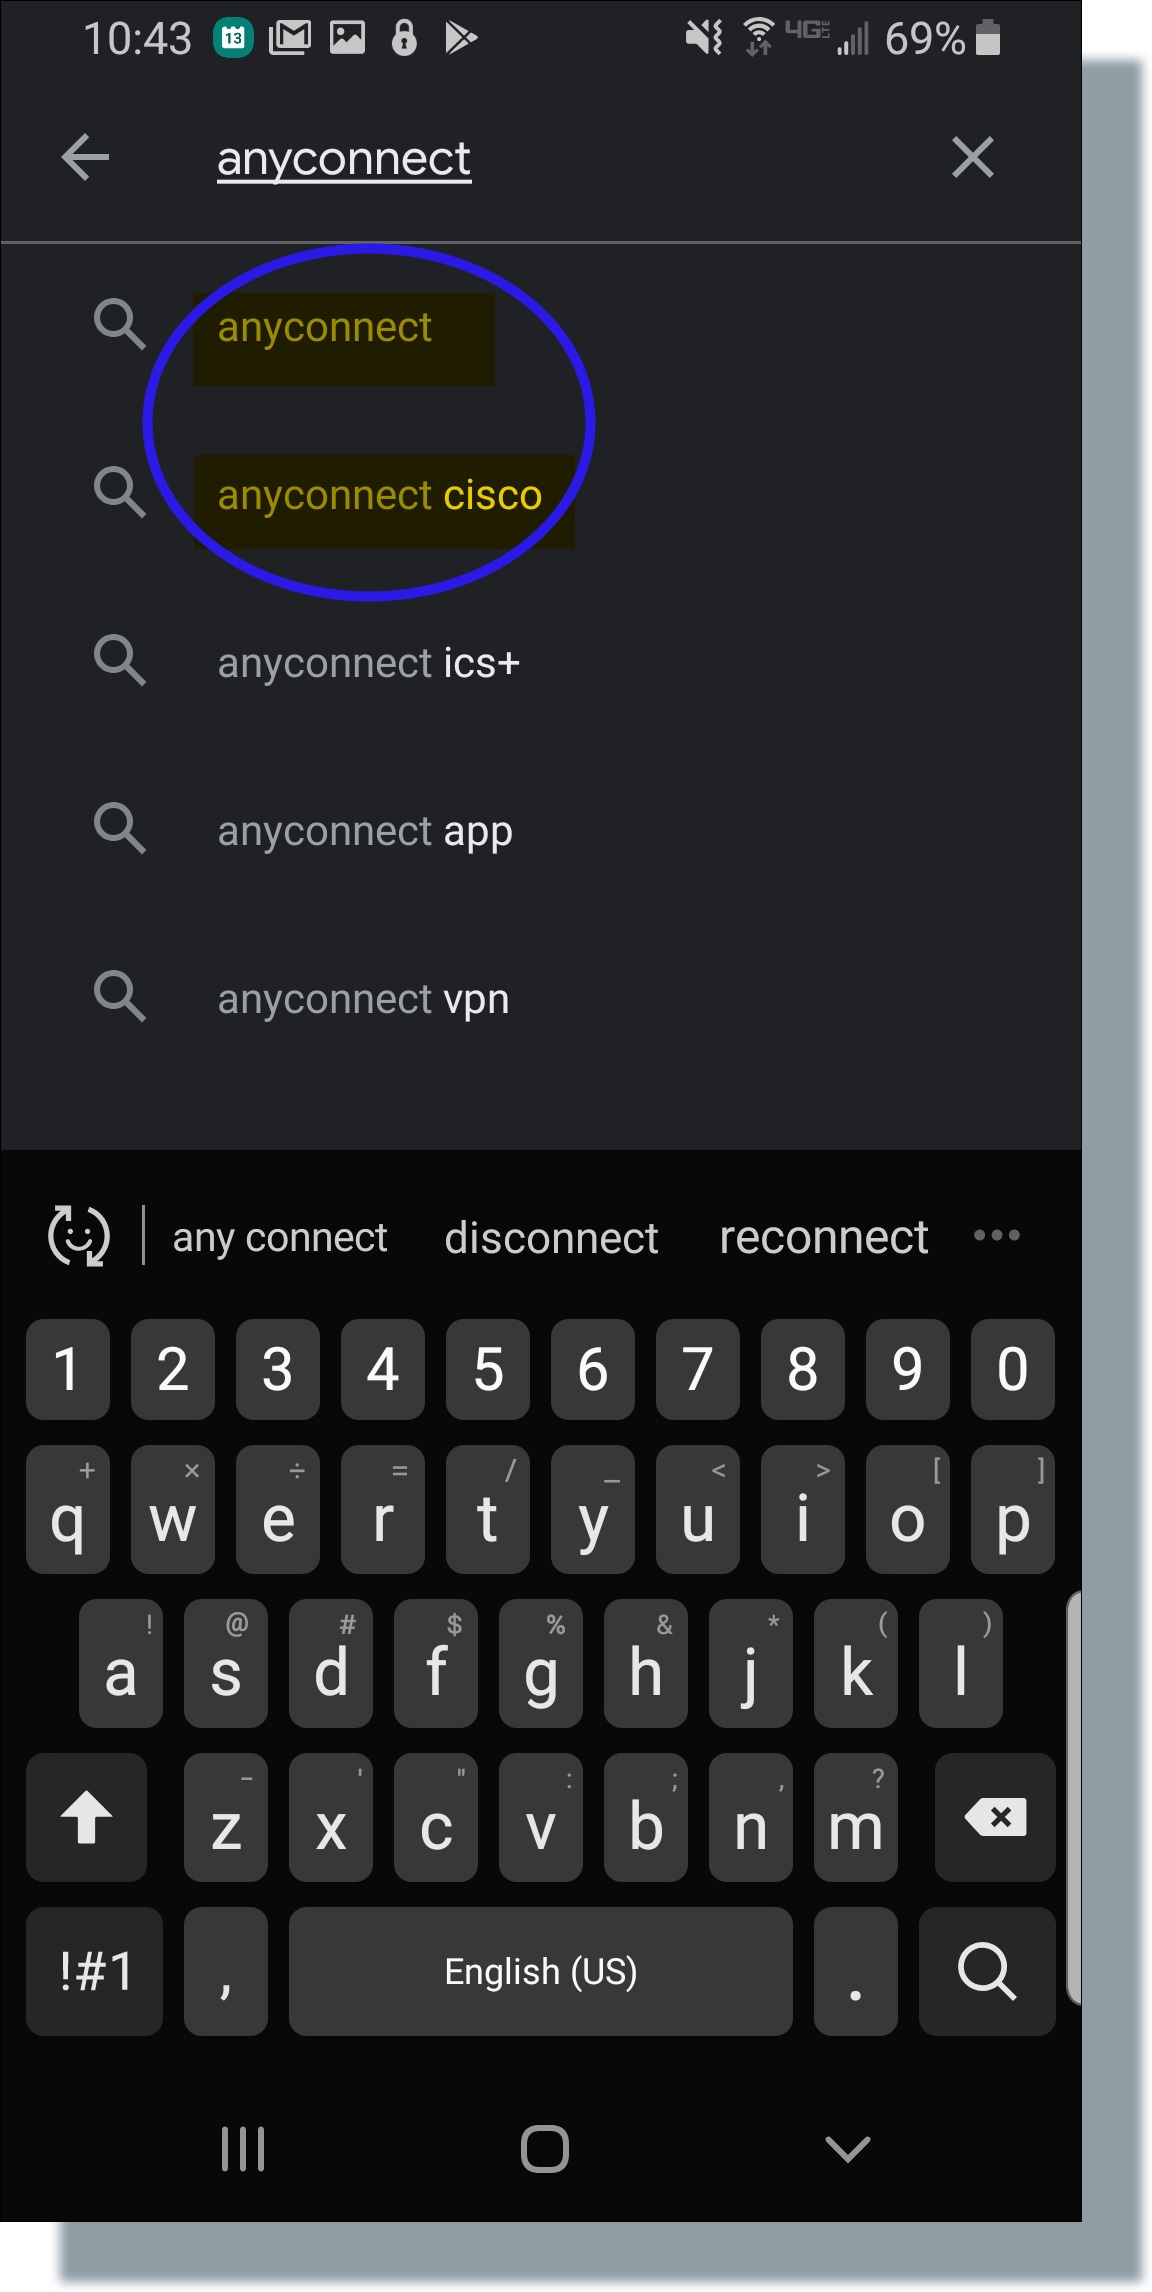 Search for AnyConnect, select 'anyconnect cisco' from search results